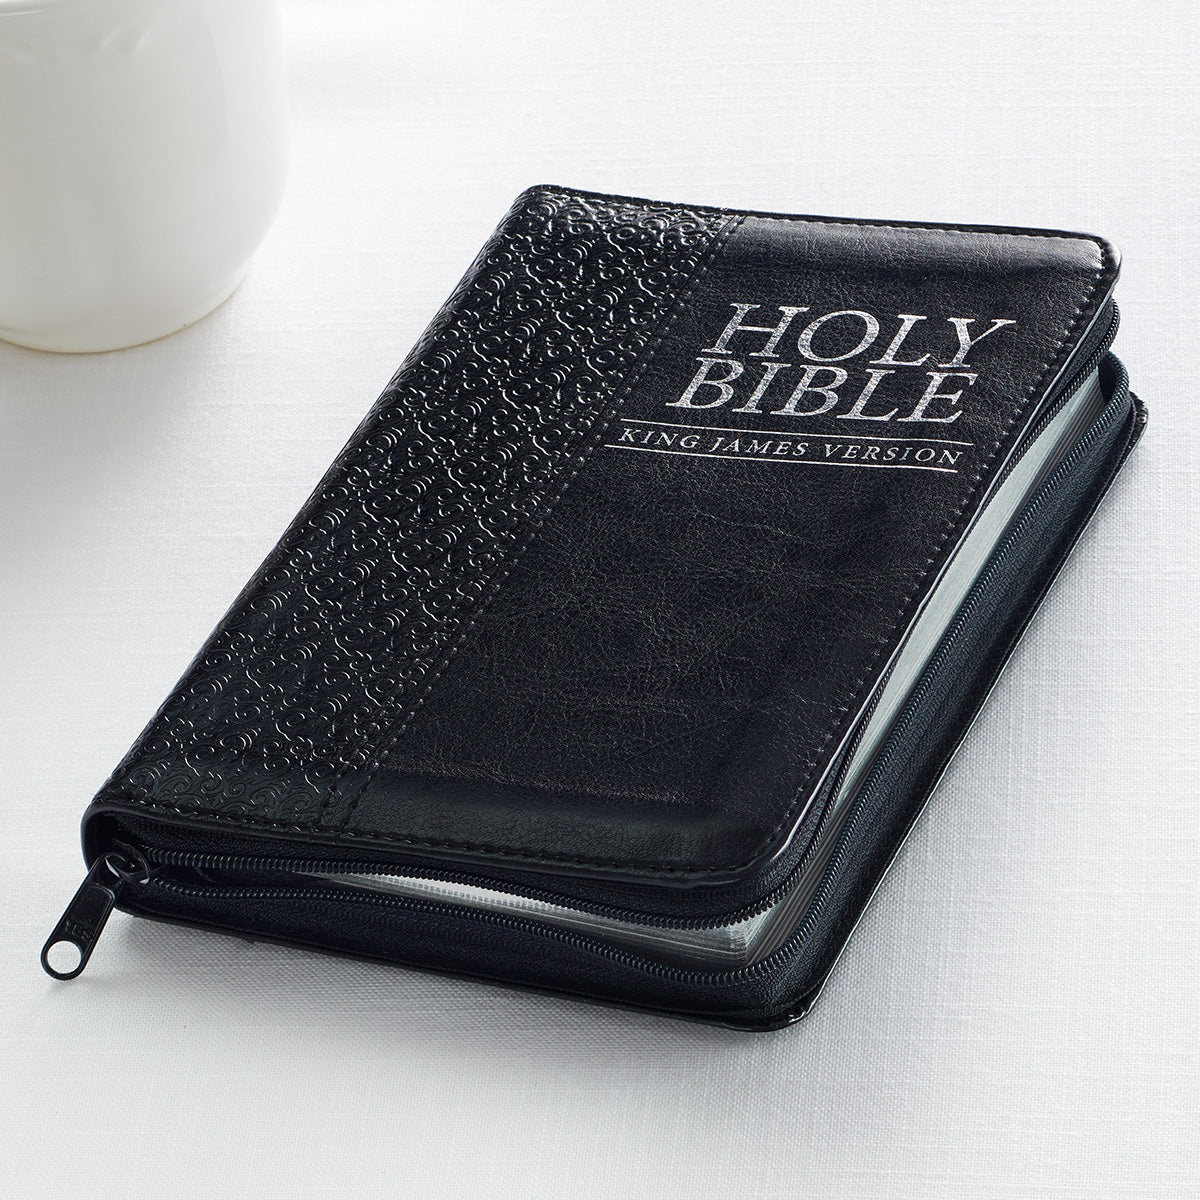 Black Faux Leather Compact King James Version Bible with Zippered Closure - The Christian Gift Company